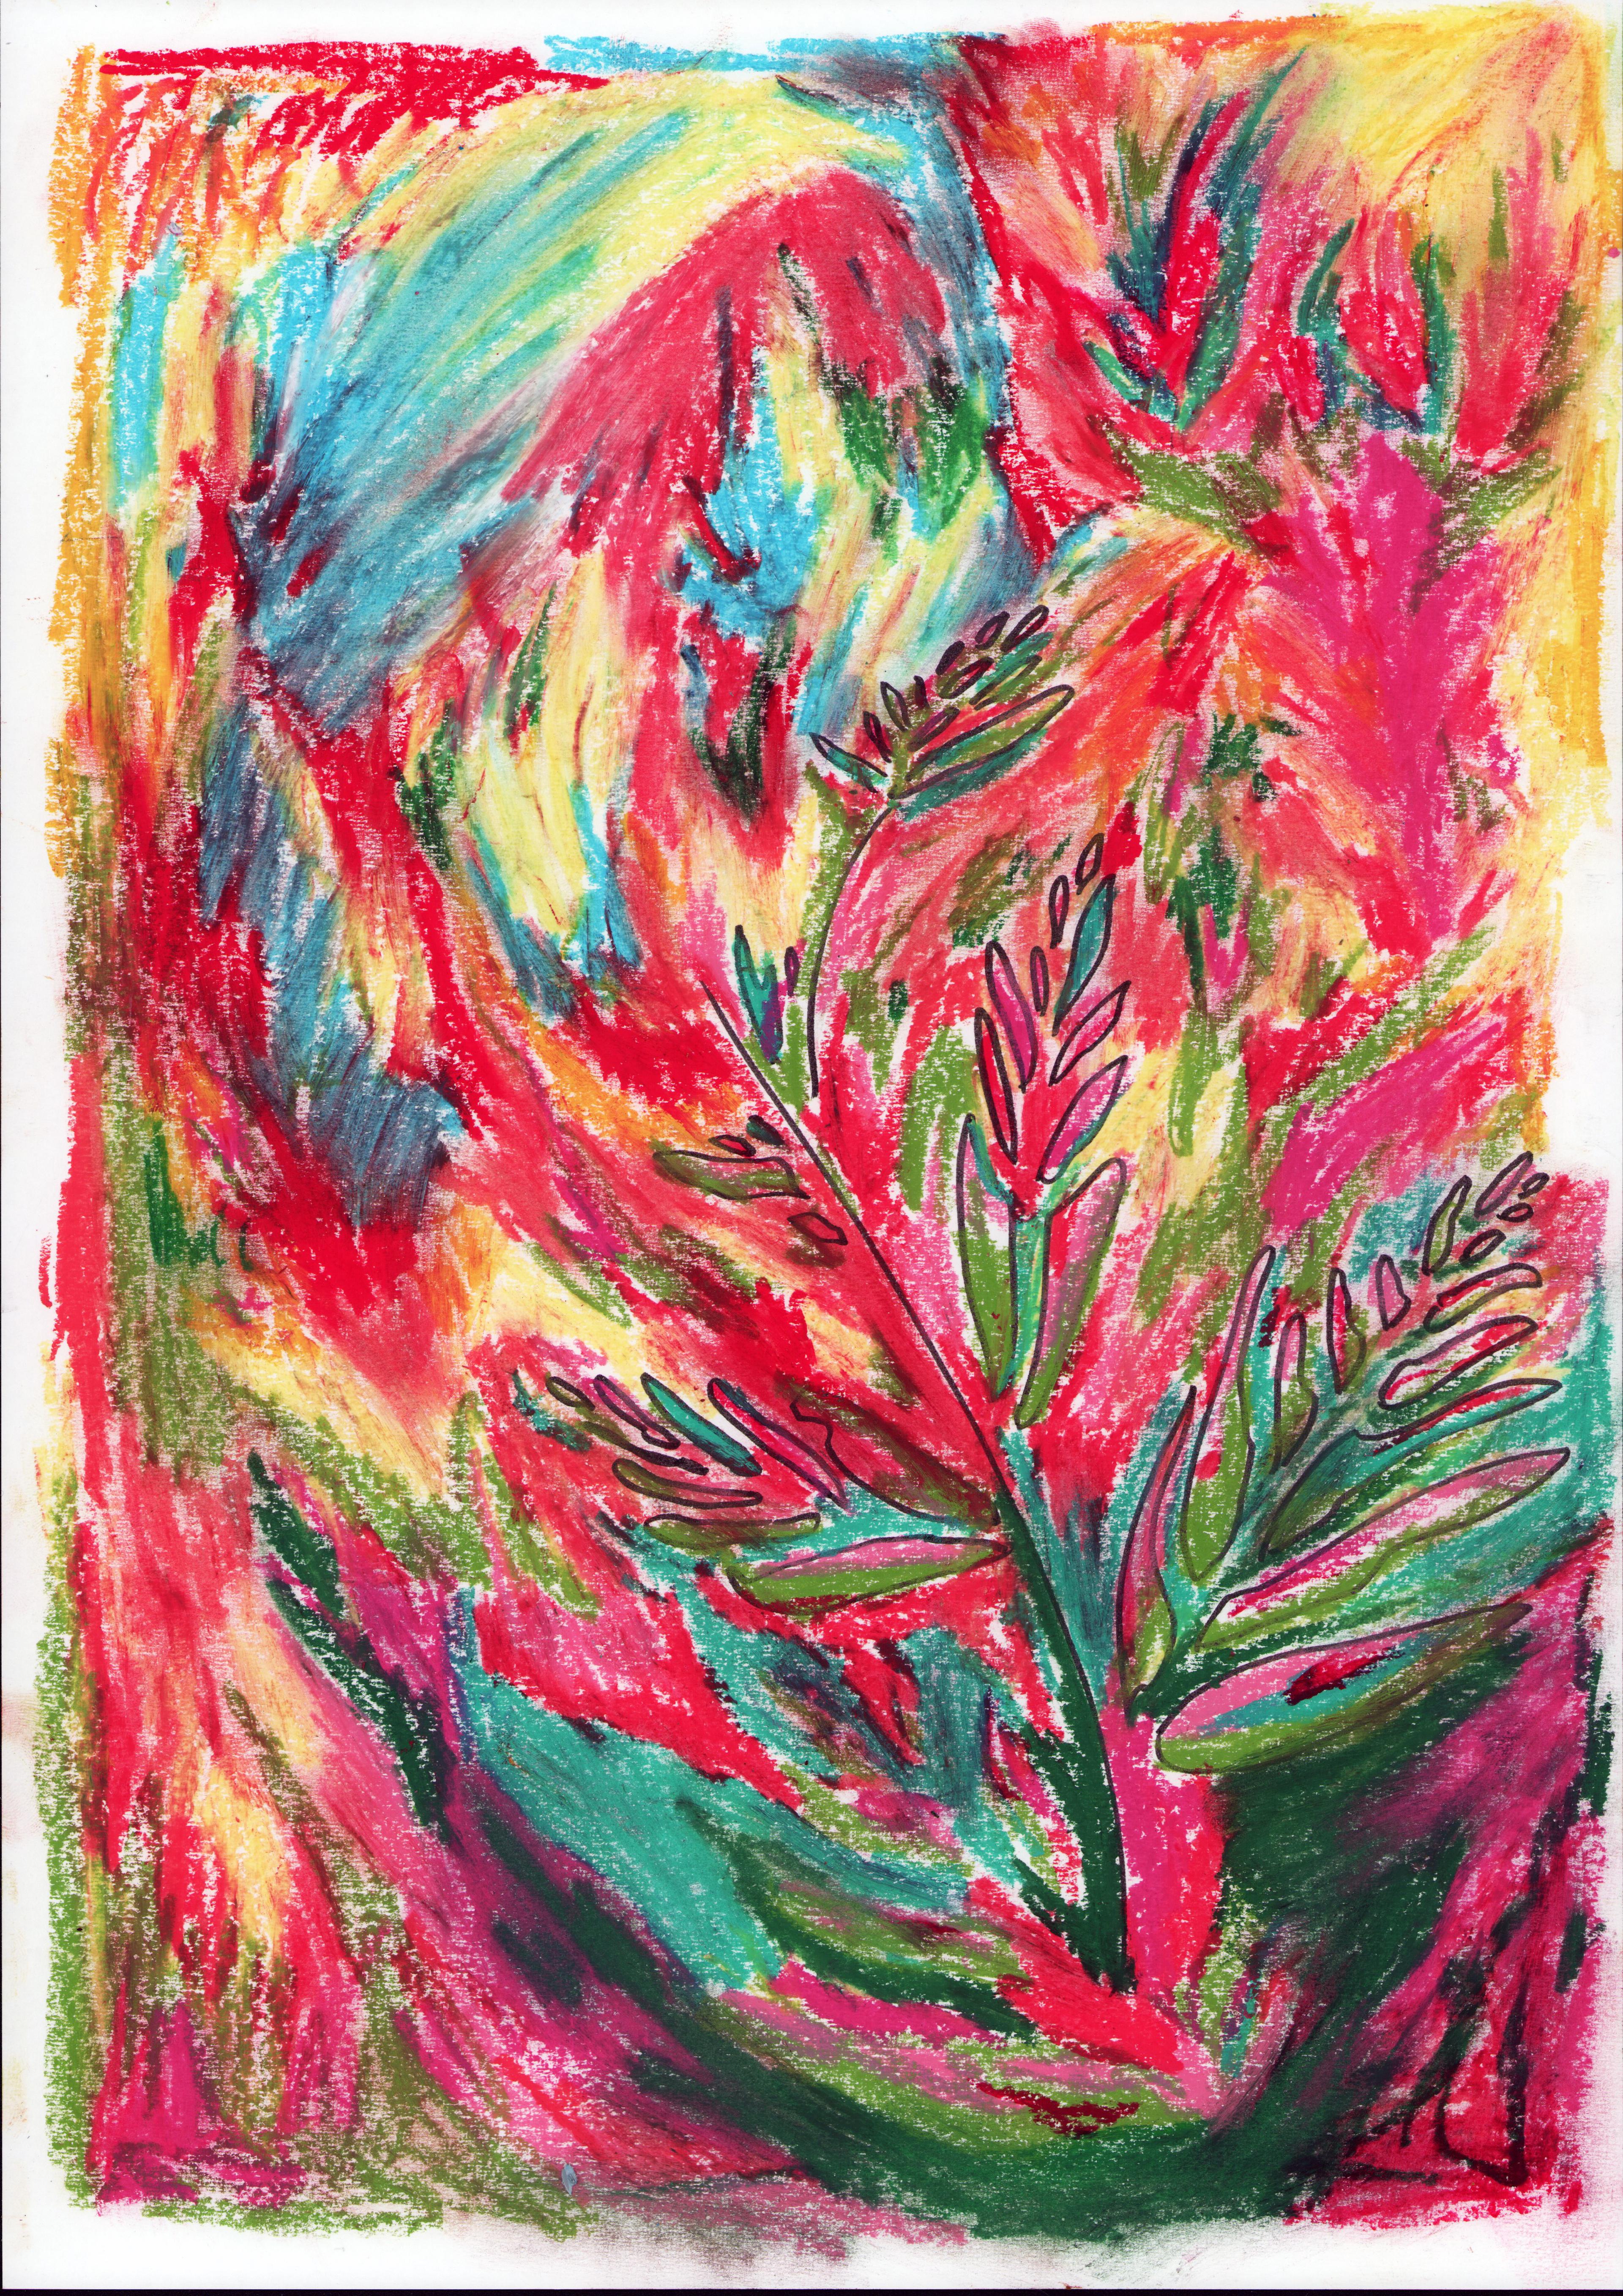 Very colorful drawing of a plants, lots of red